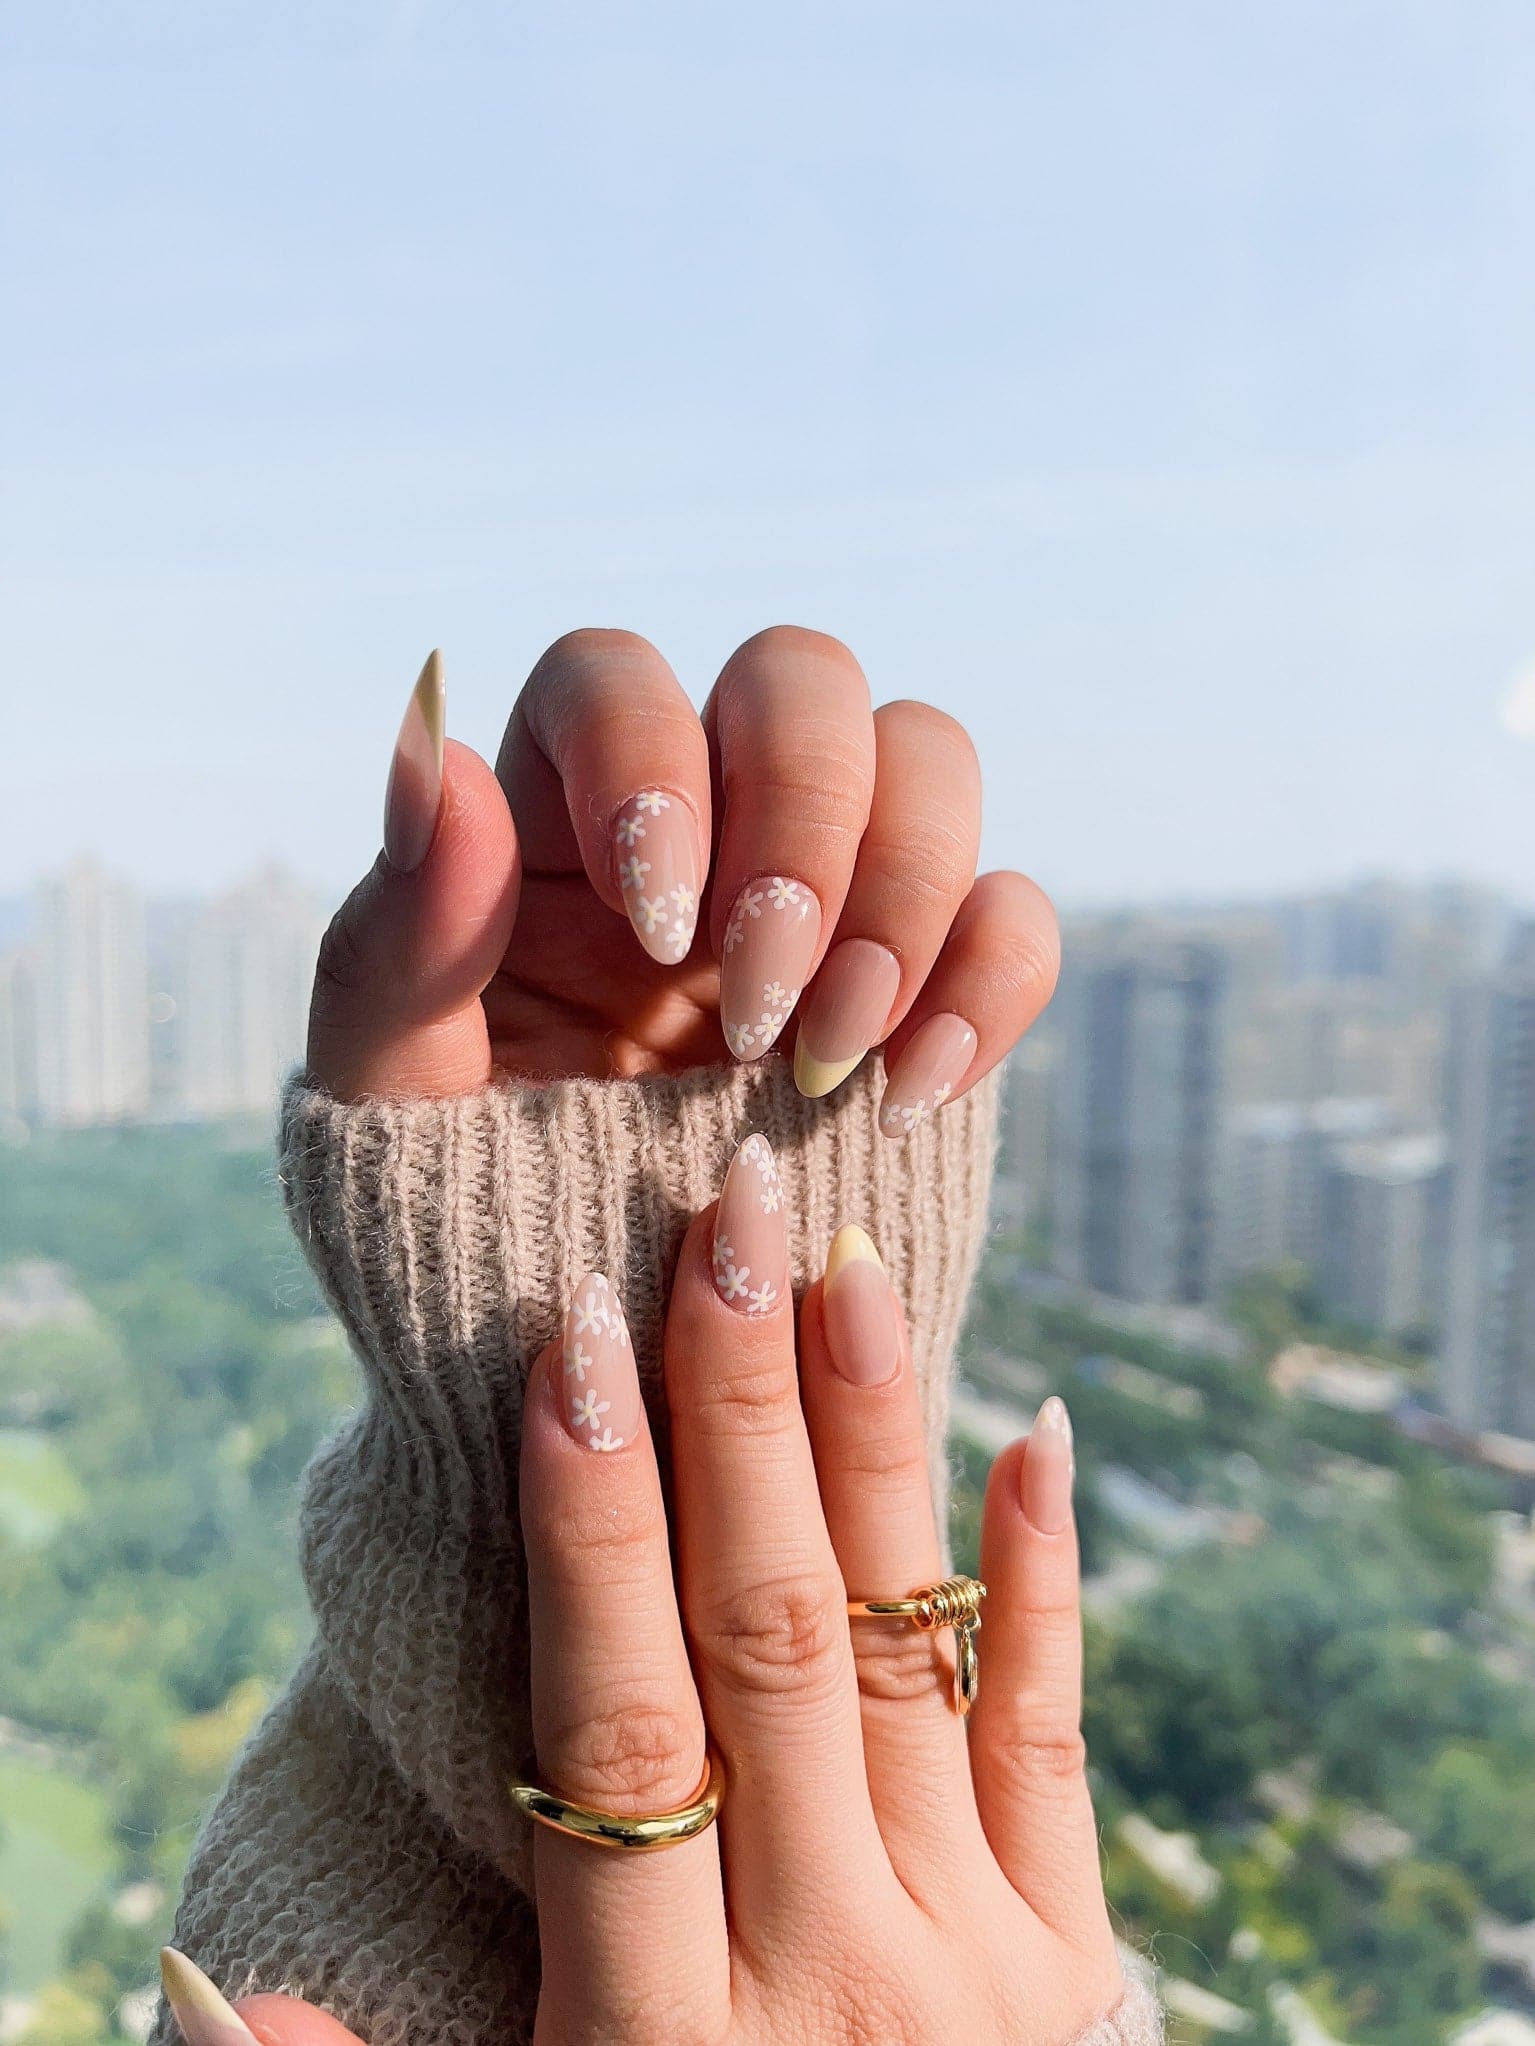 Spring nails - Nude color Med Almond nails